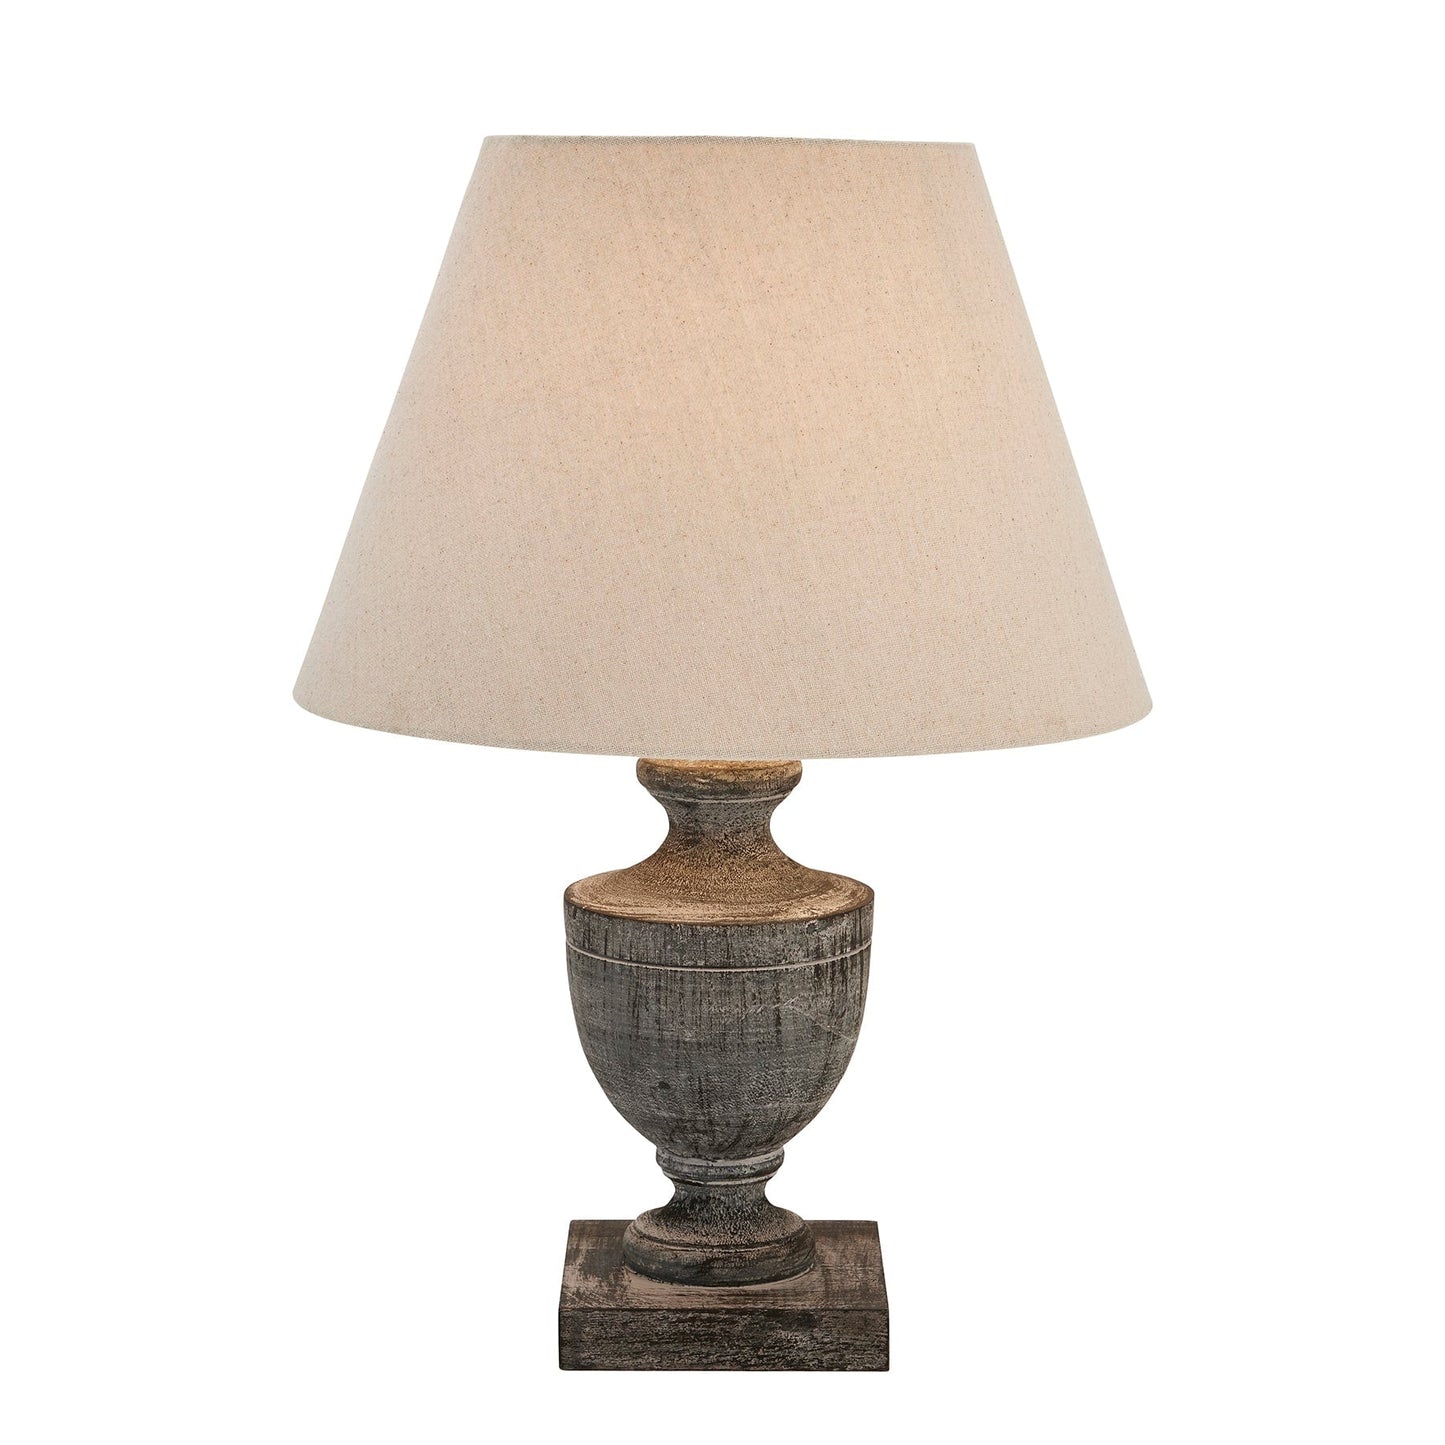 Hill Interiors Table Lamp Incia Urn Wooden Table Lamp